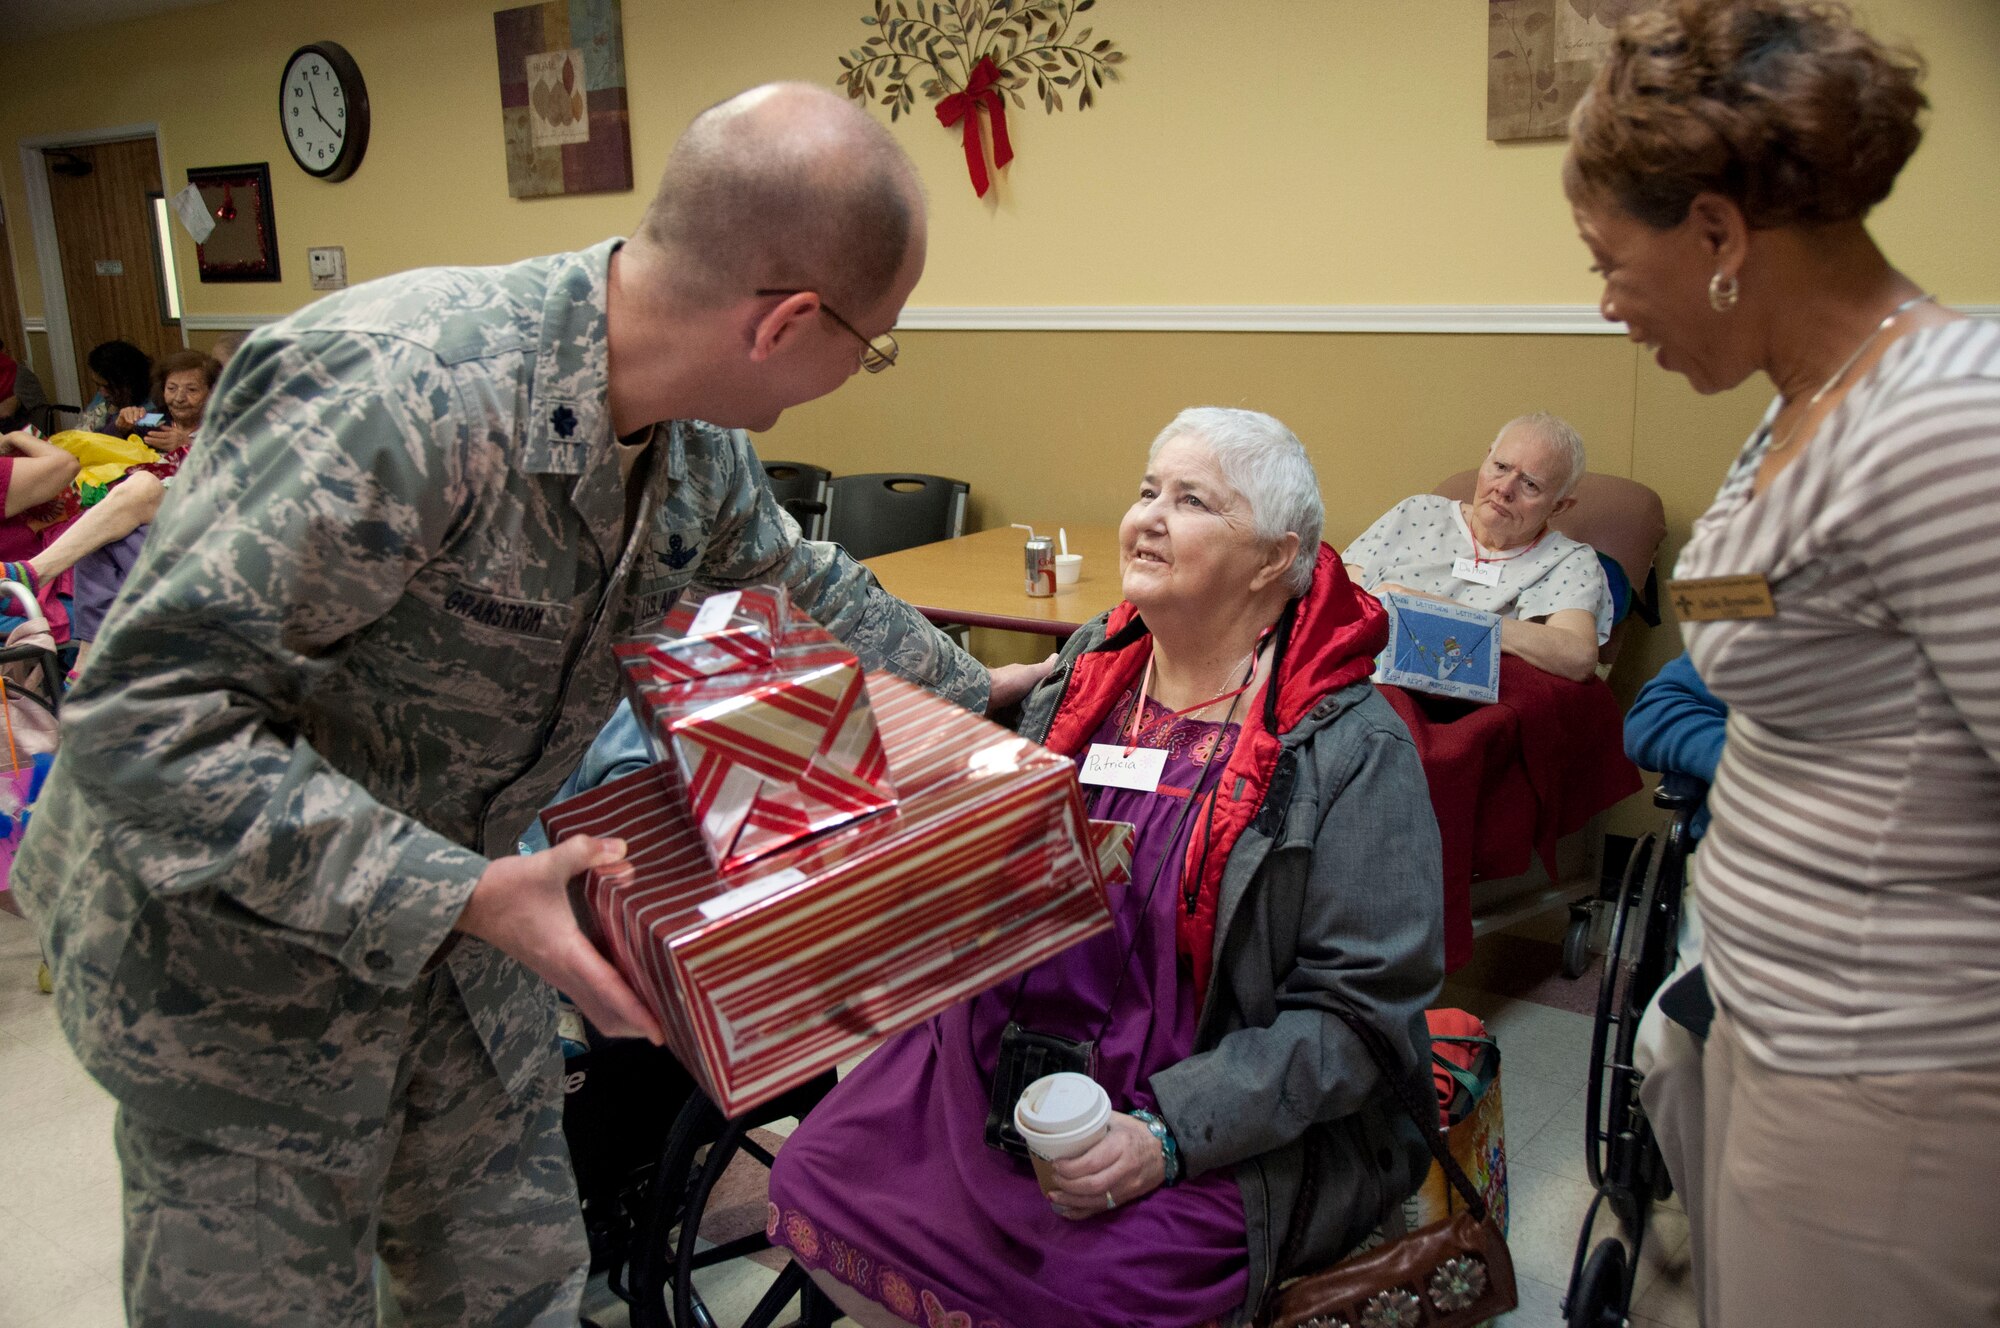 Lt. Col. Jared anstrom, commander of the 737th Training Support Group passed out a few of the gifts during Operation Grayson Square. Military Training Instructors and other members of the 737th Training Group played Santa at a local skilled nursing facility delivering gifts to 84 residents this season. The 737th Training Group has been "elfing it up" with Operation Grayson Square since 1999. (U.S. Air Force Photo/Melinda Mueller) 

